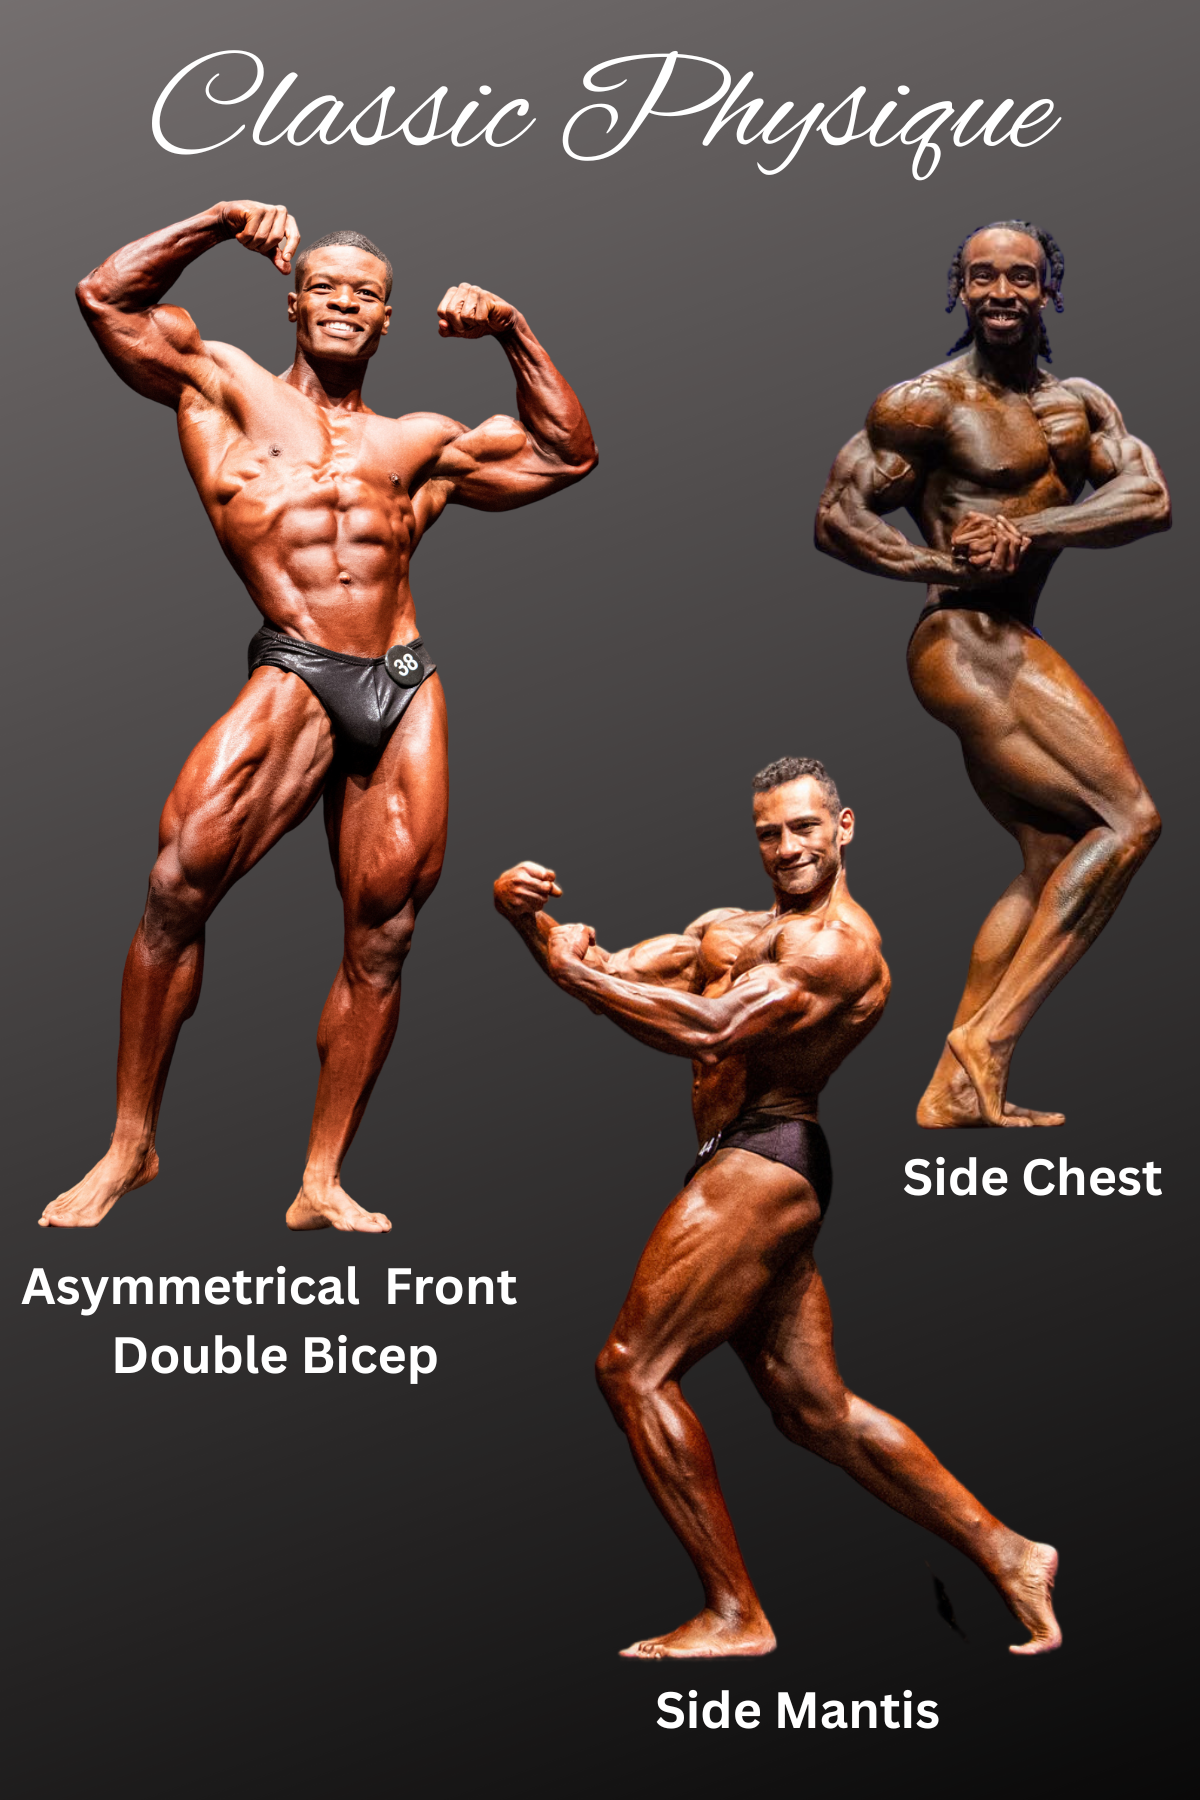 A classic physique pose from the Classic Physique champion. : r/bodybuilding